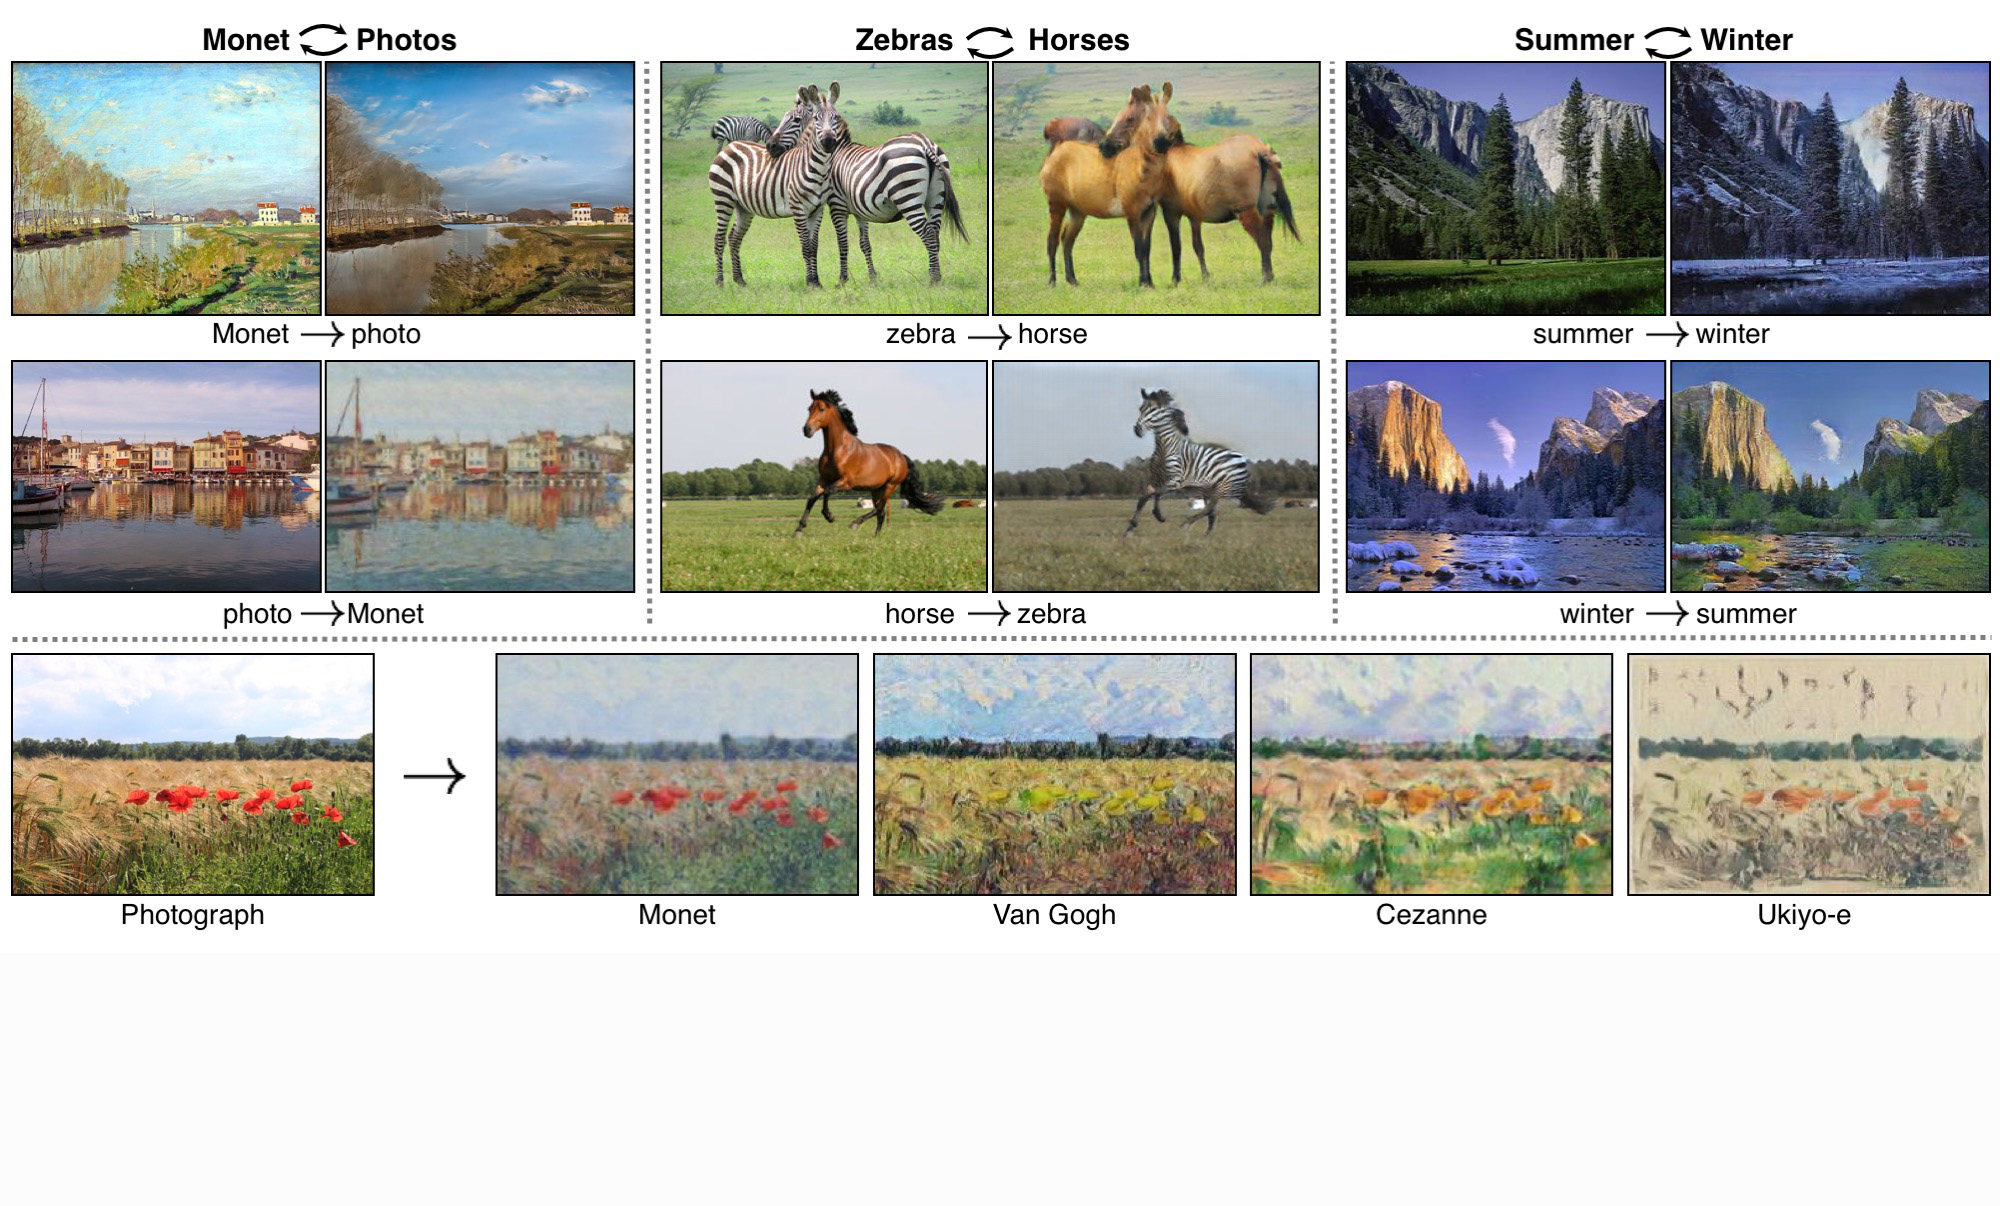 The PyTorch implementation of CycleGAN has been used for advanced image-to-image translation.